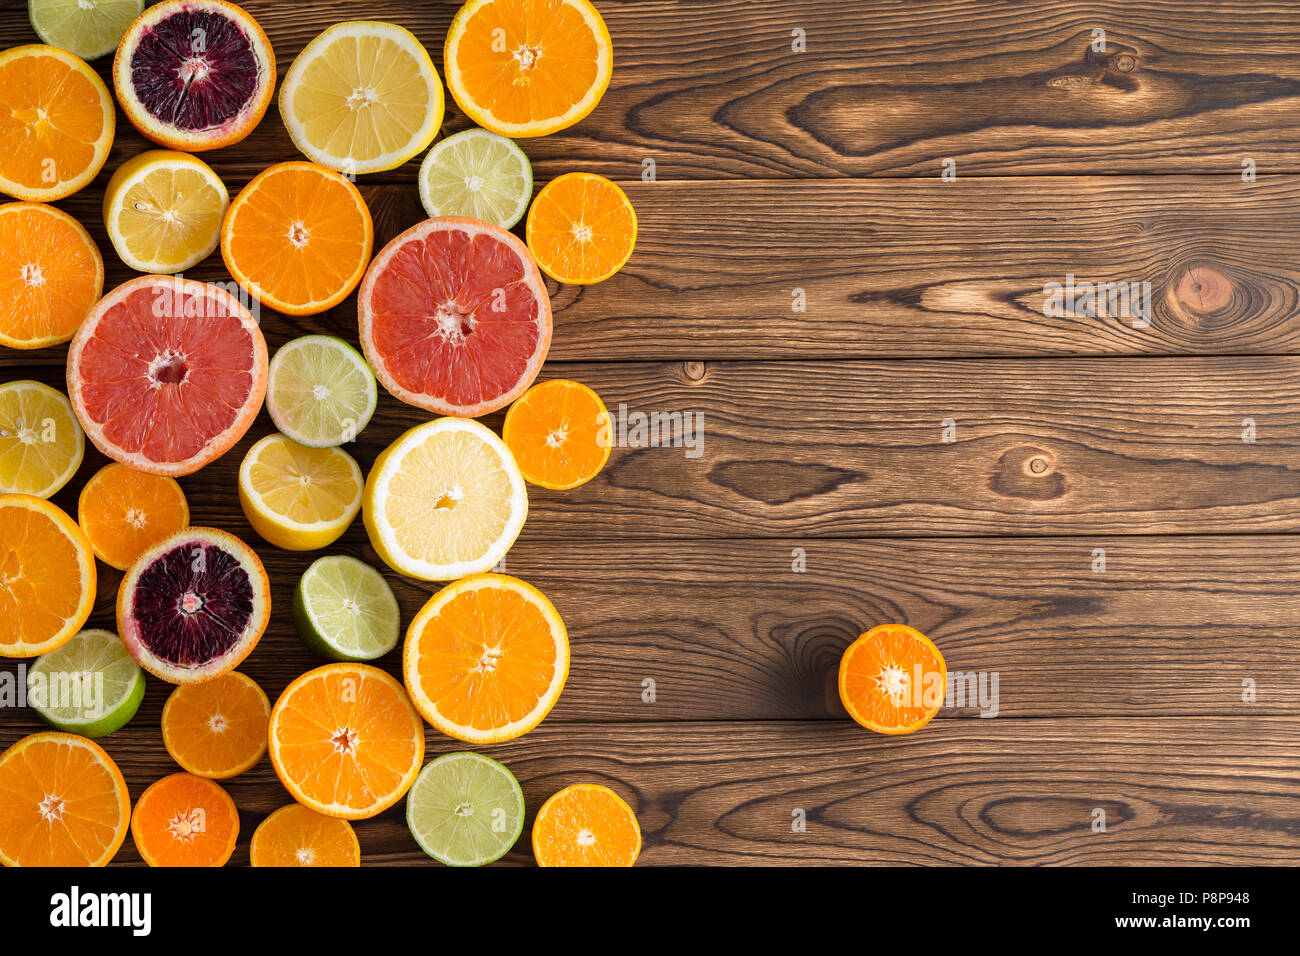 Assorted fresh cut citrus fruits on a wooden background with copy space and a single clementine set to the side viewed from above Stock Photo